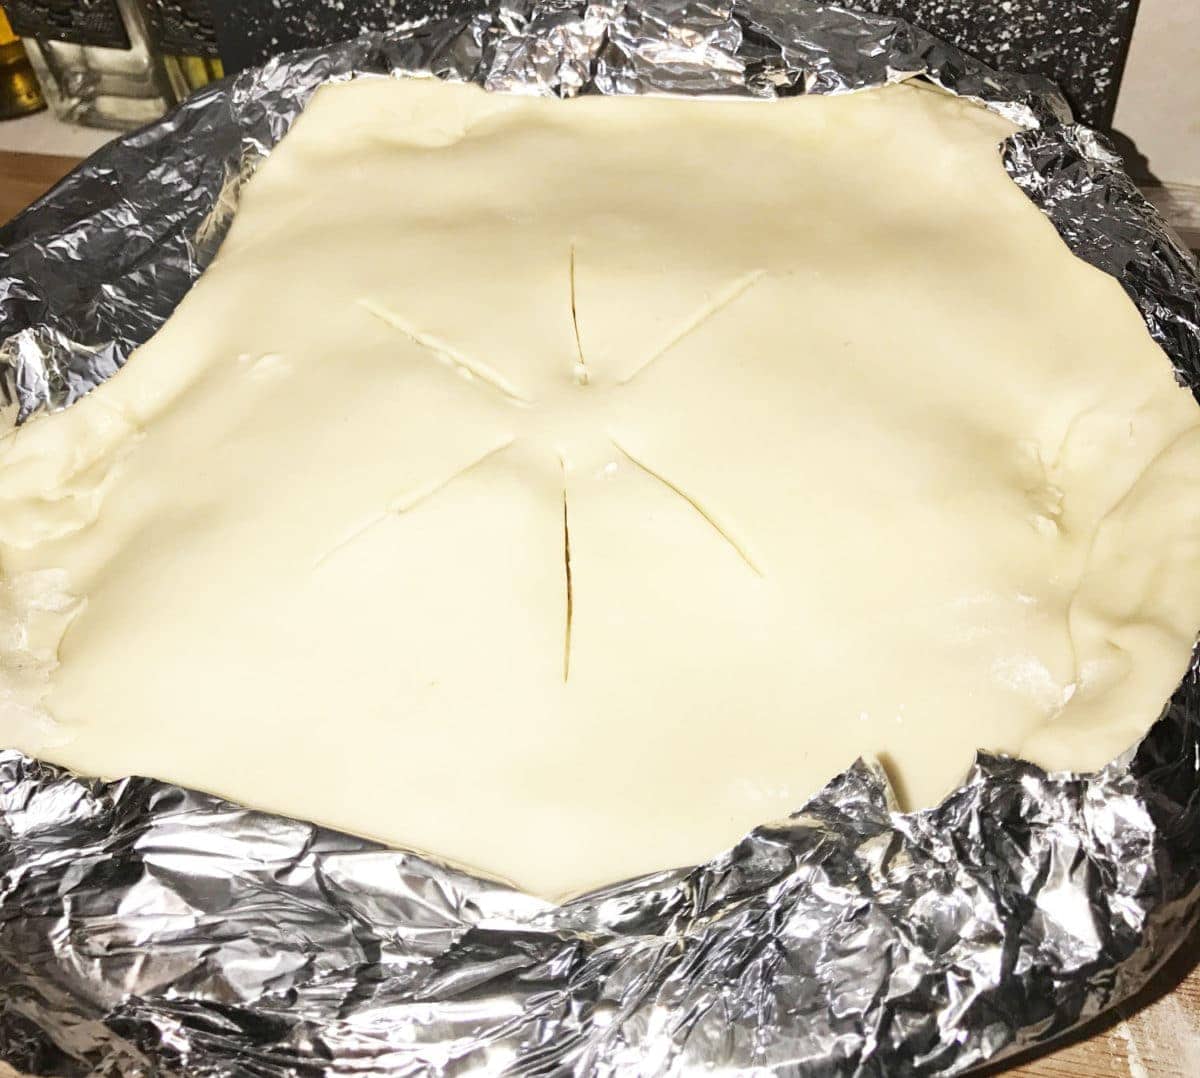 the pie crust laid over the uncooked chicken pot pie